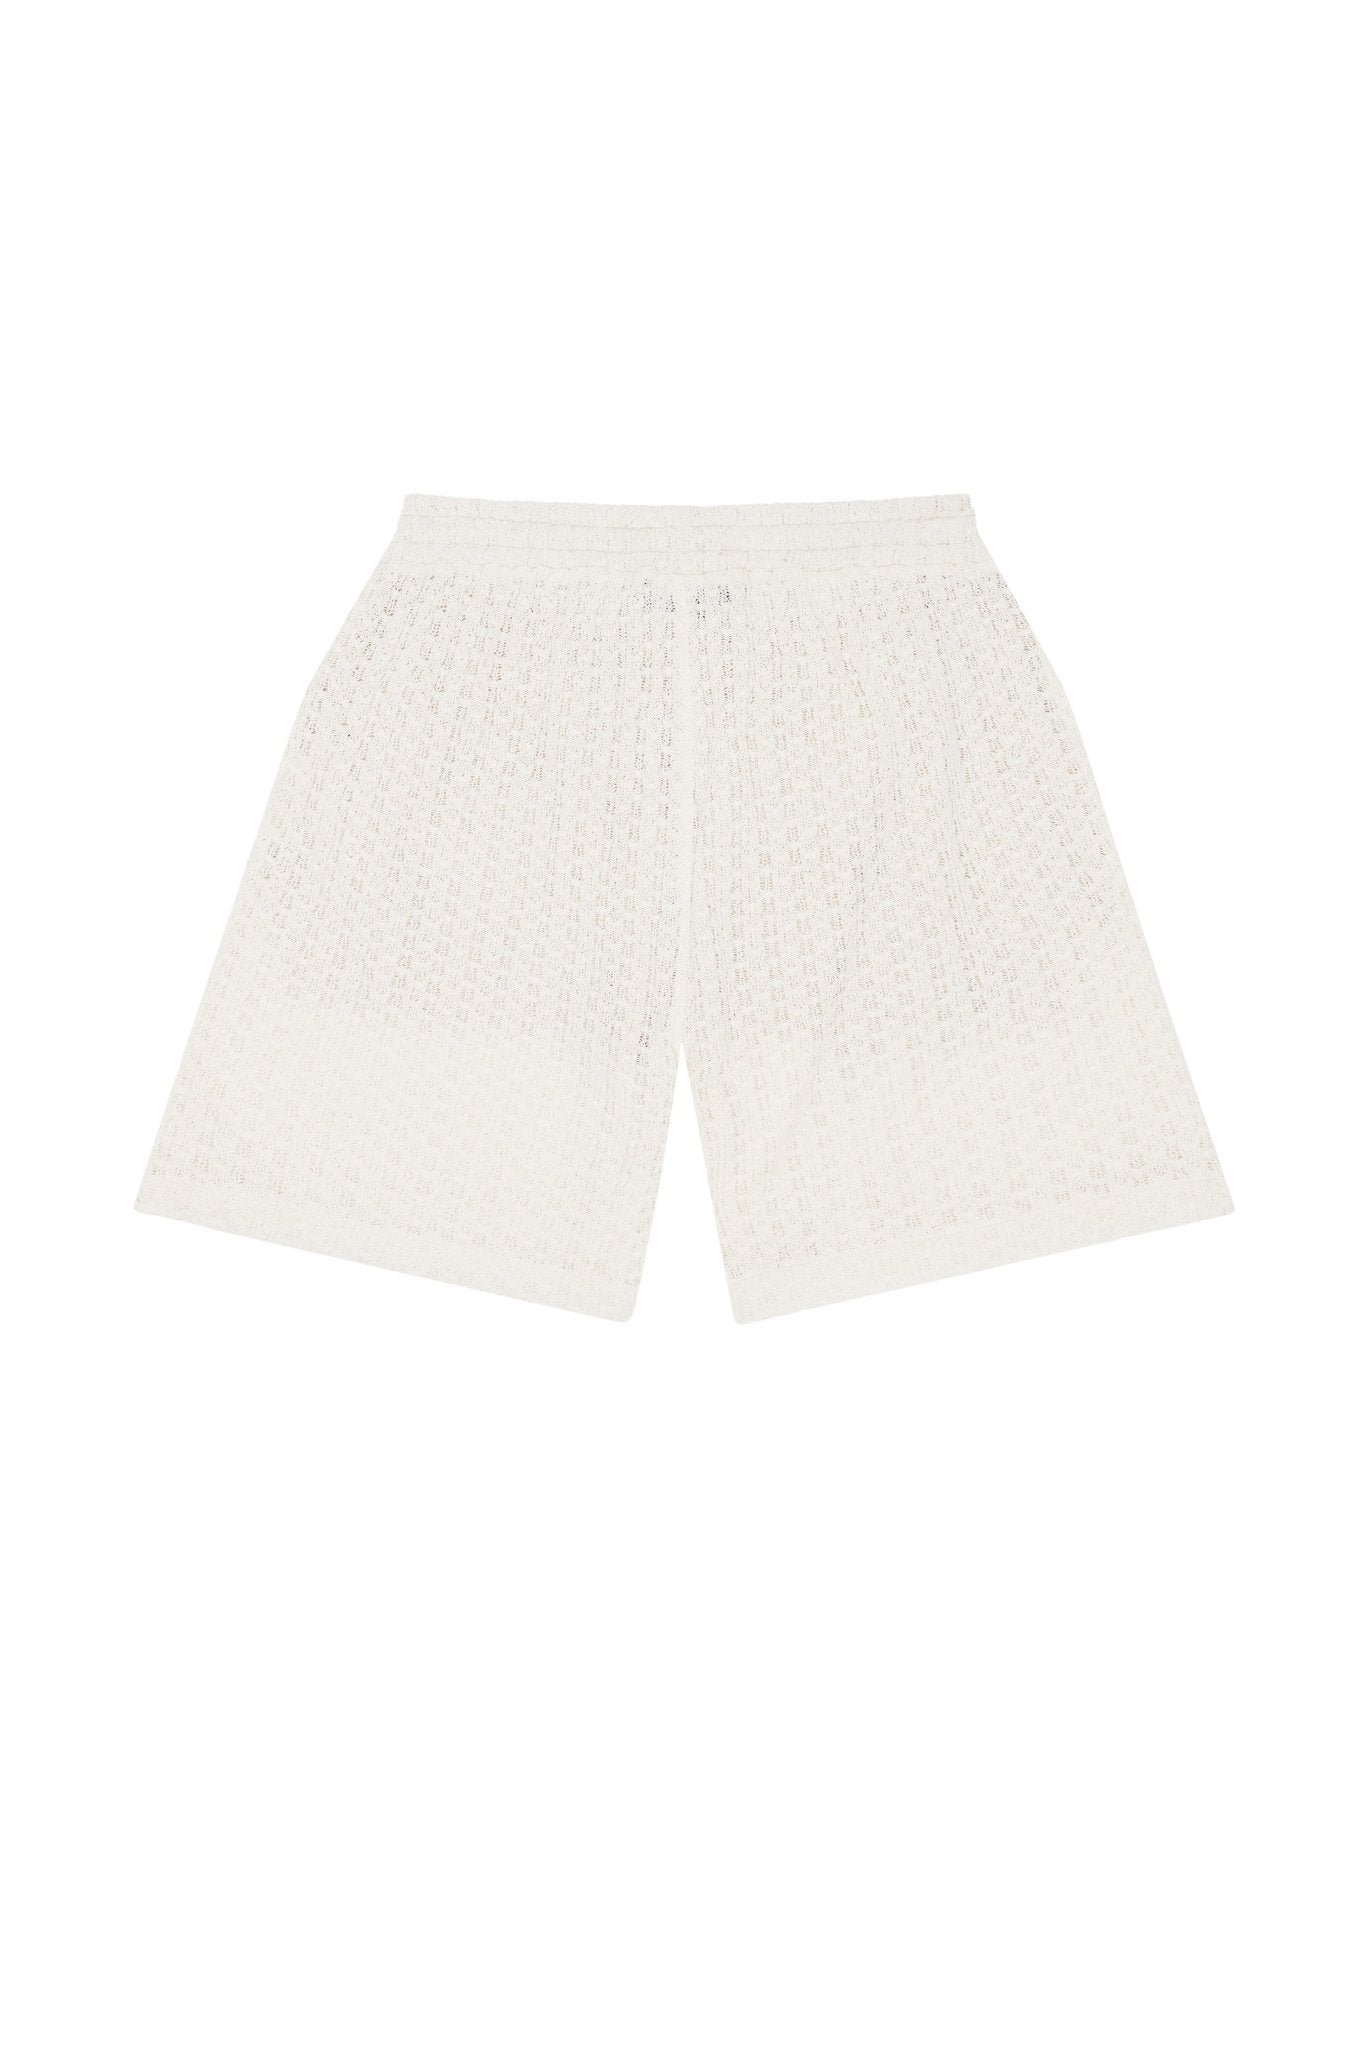 about---blank.comknitted shorts ecru